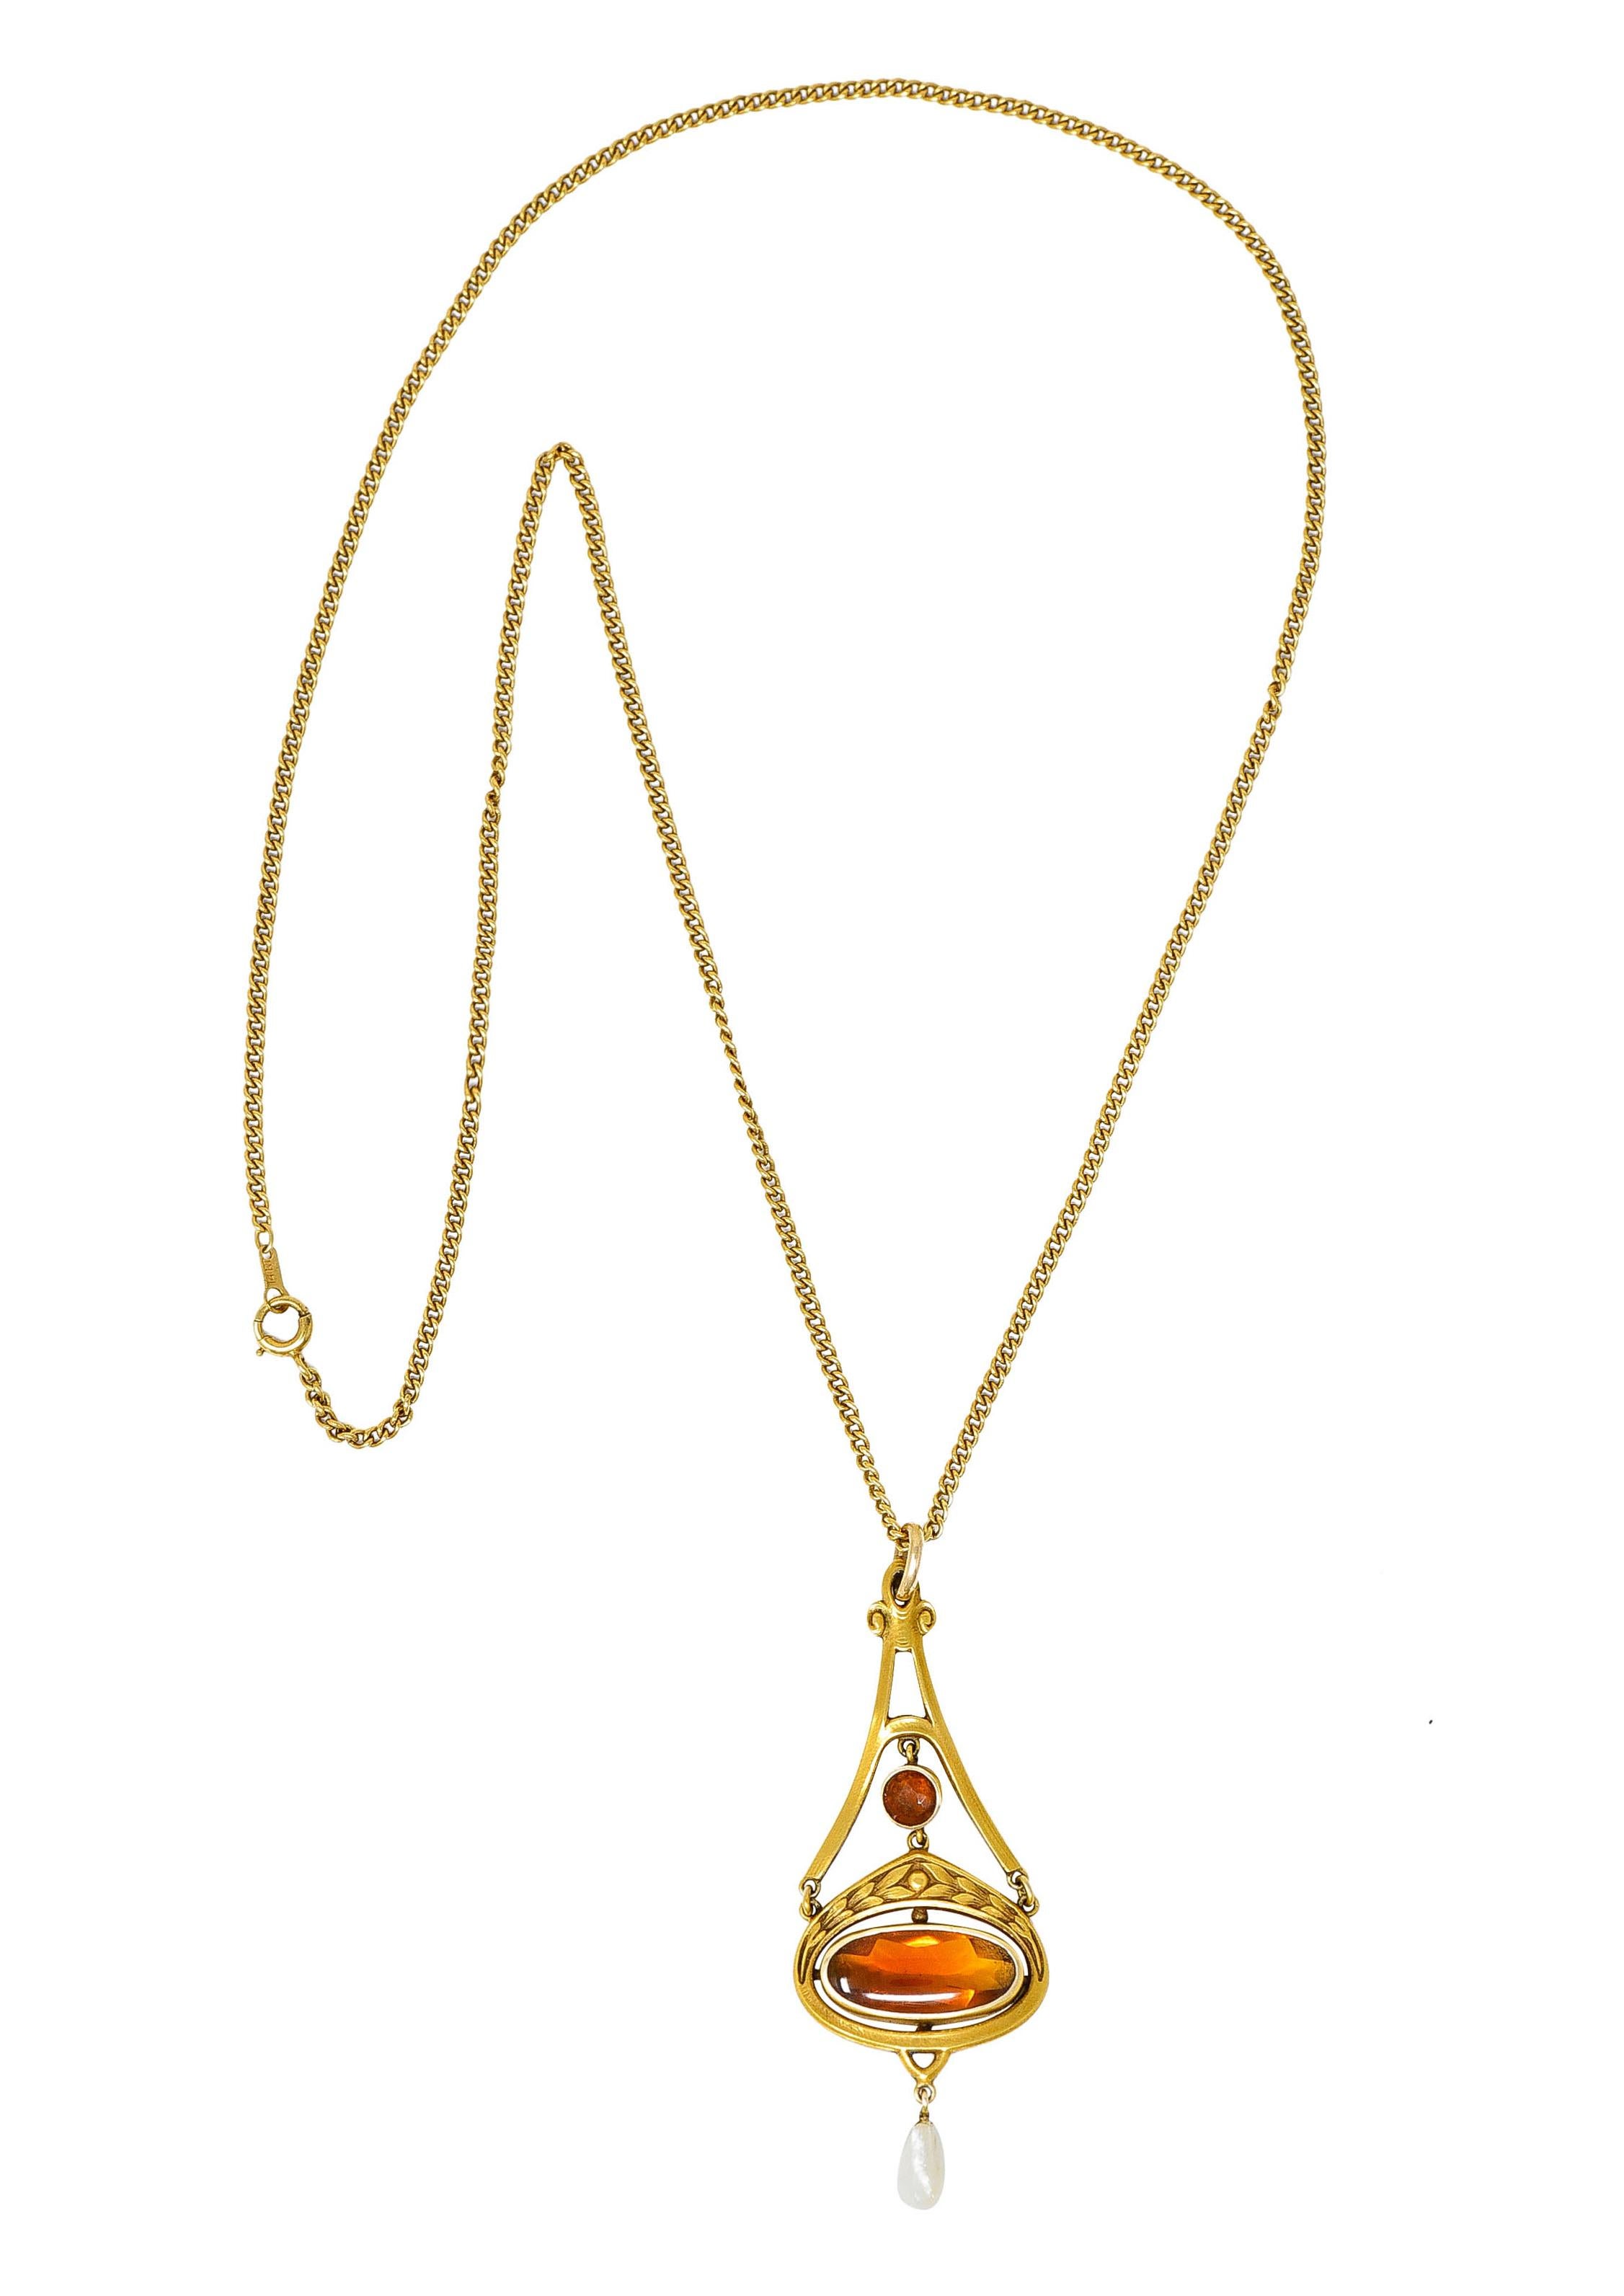 Pendant articulates and is designed as a pitched form over a chestnut shaped base

Decorated with scrolled volutes and a highly rendered wheat motif and terminates as a dogtooth pearl drop

Centering a 4.5 mm round cut citrine and an elongated oval